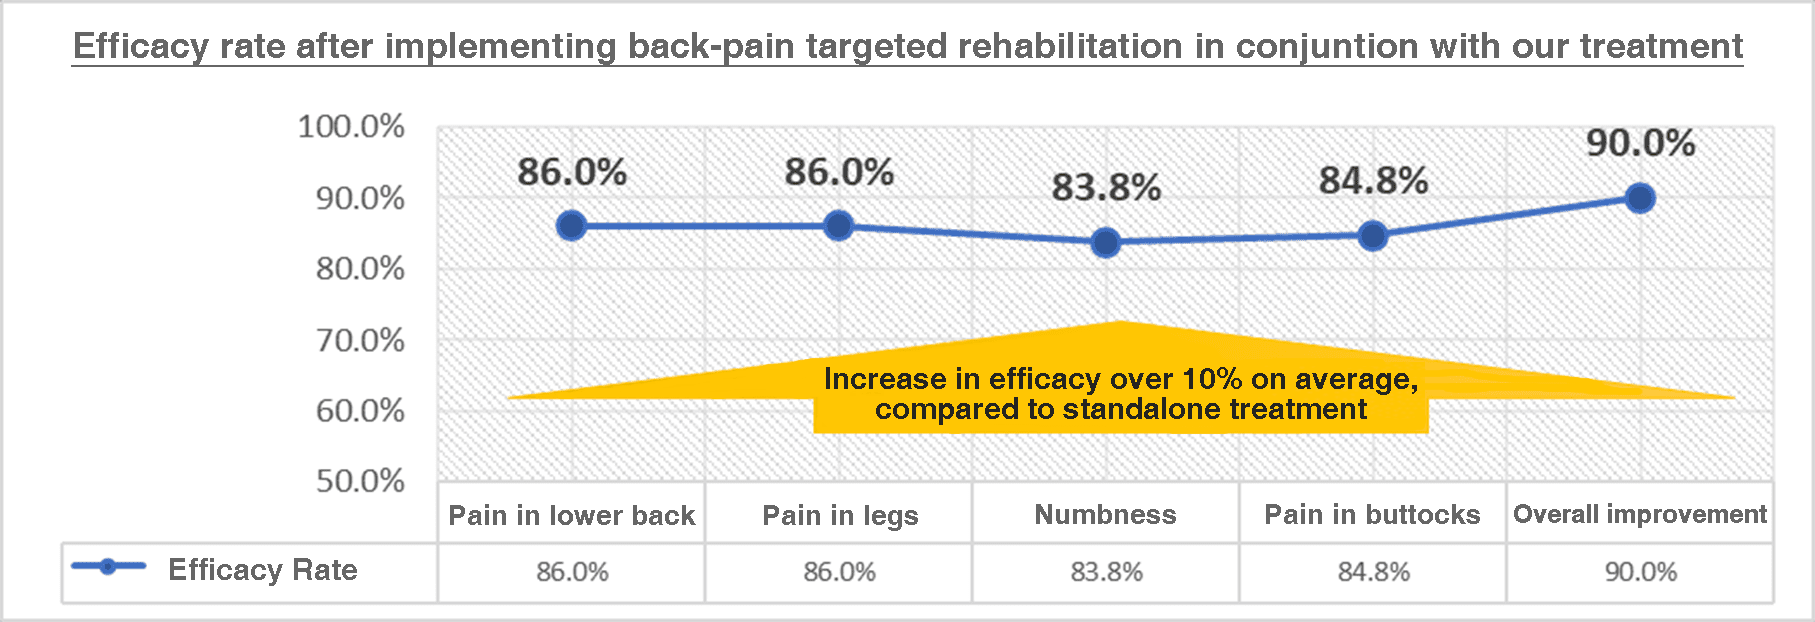 About the therapeutic efficacy rate when special rehabilitation for low back pain is also implemented